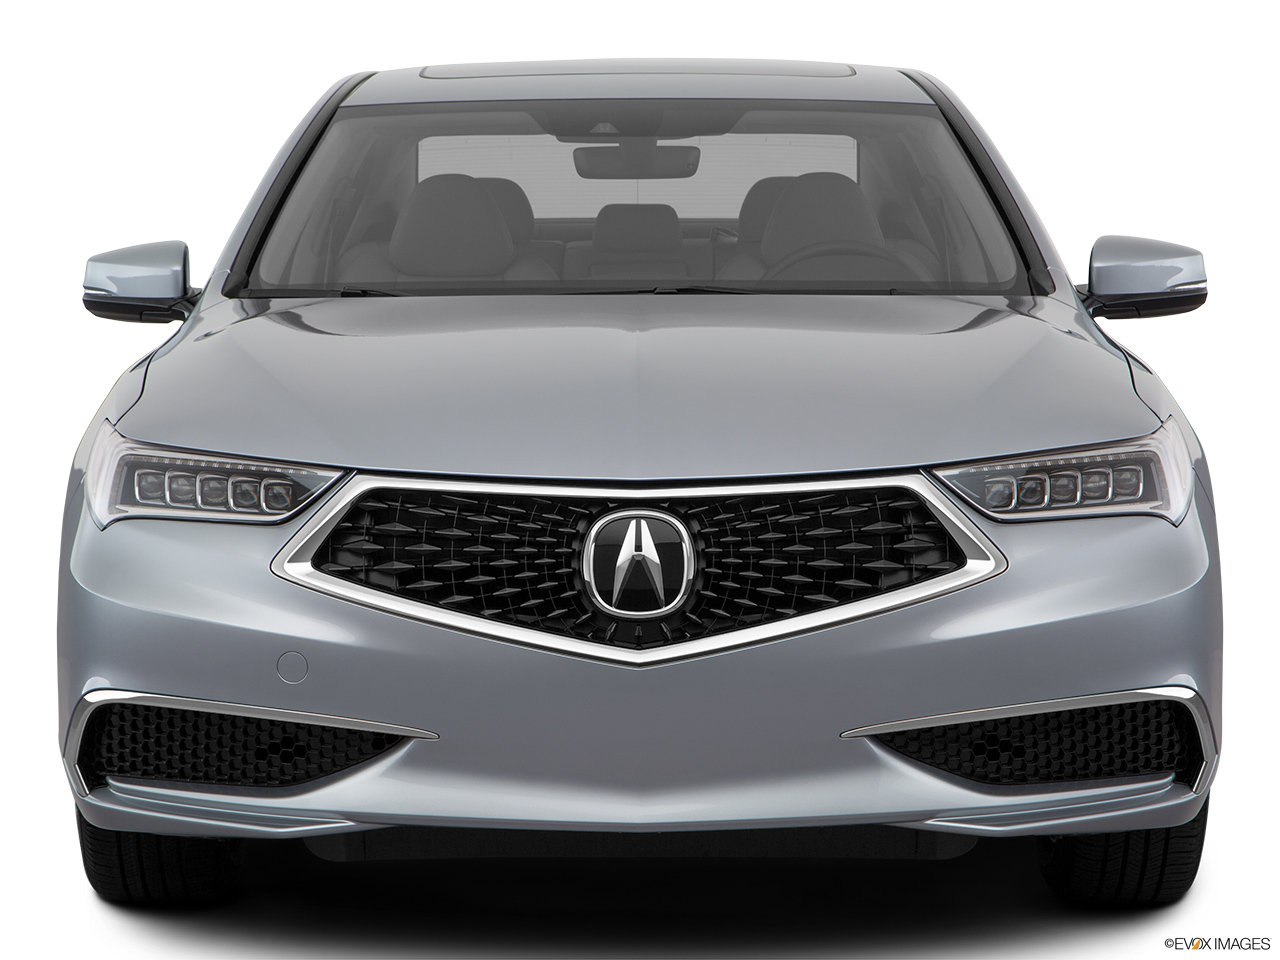 2020 Acura TLX 2.4 8-DCT P-AWS Low/wide front. 